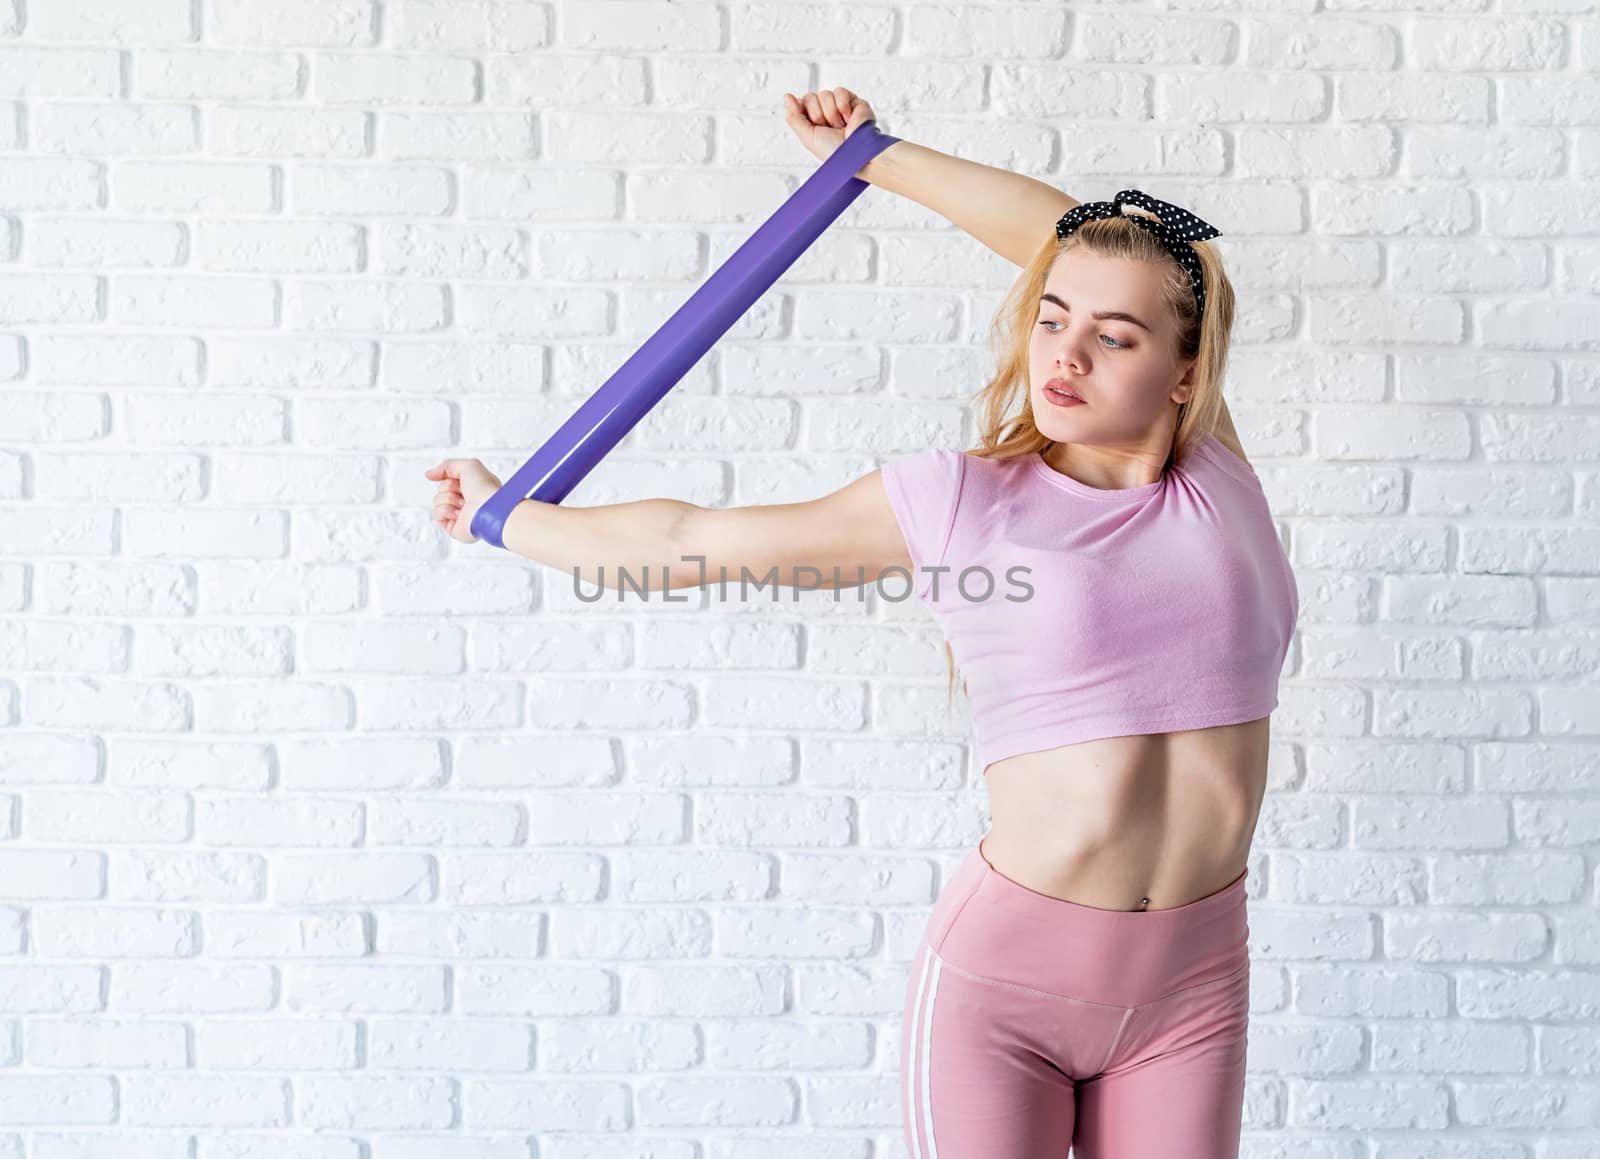 Fitness, sport, training and lifestyle concept. Staying home. Athletic woman doing exercises using a resistance band at home at white brick wall background with copy space